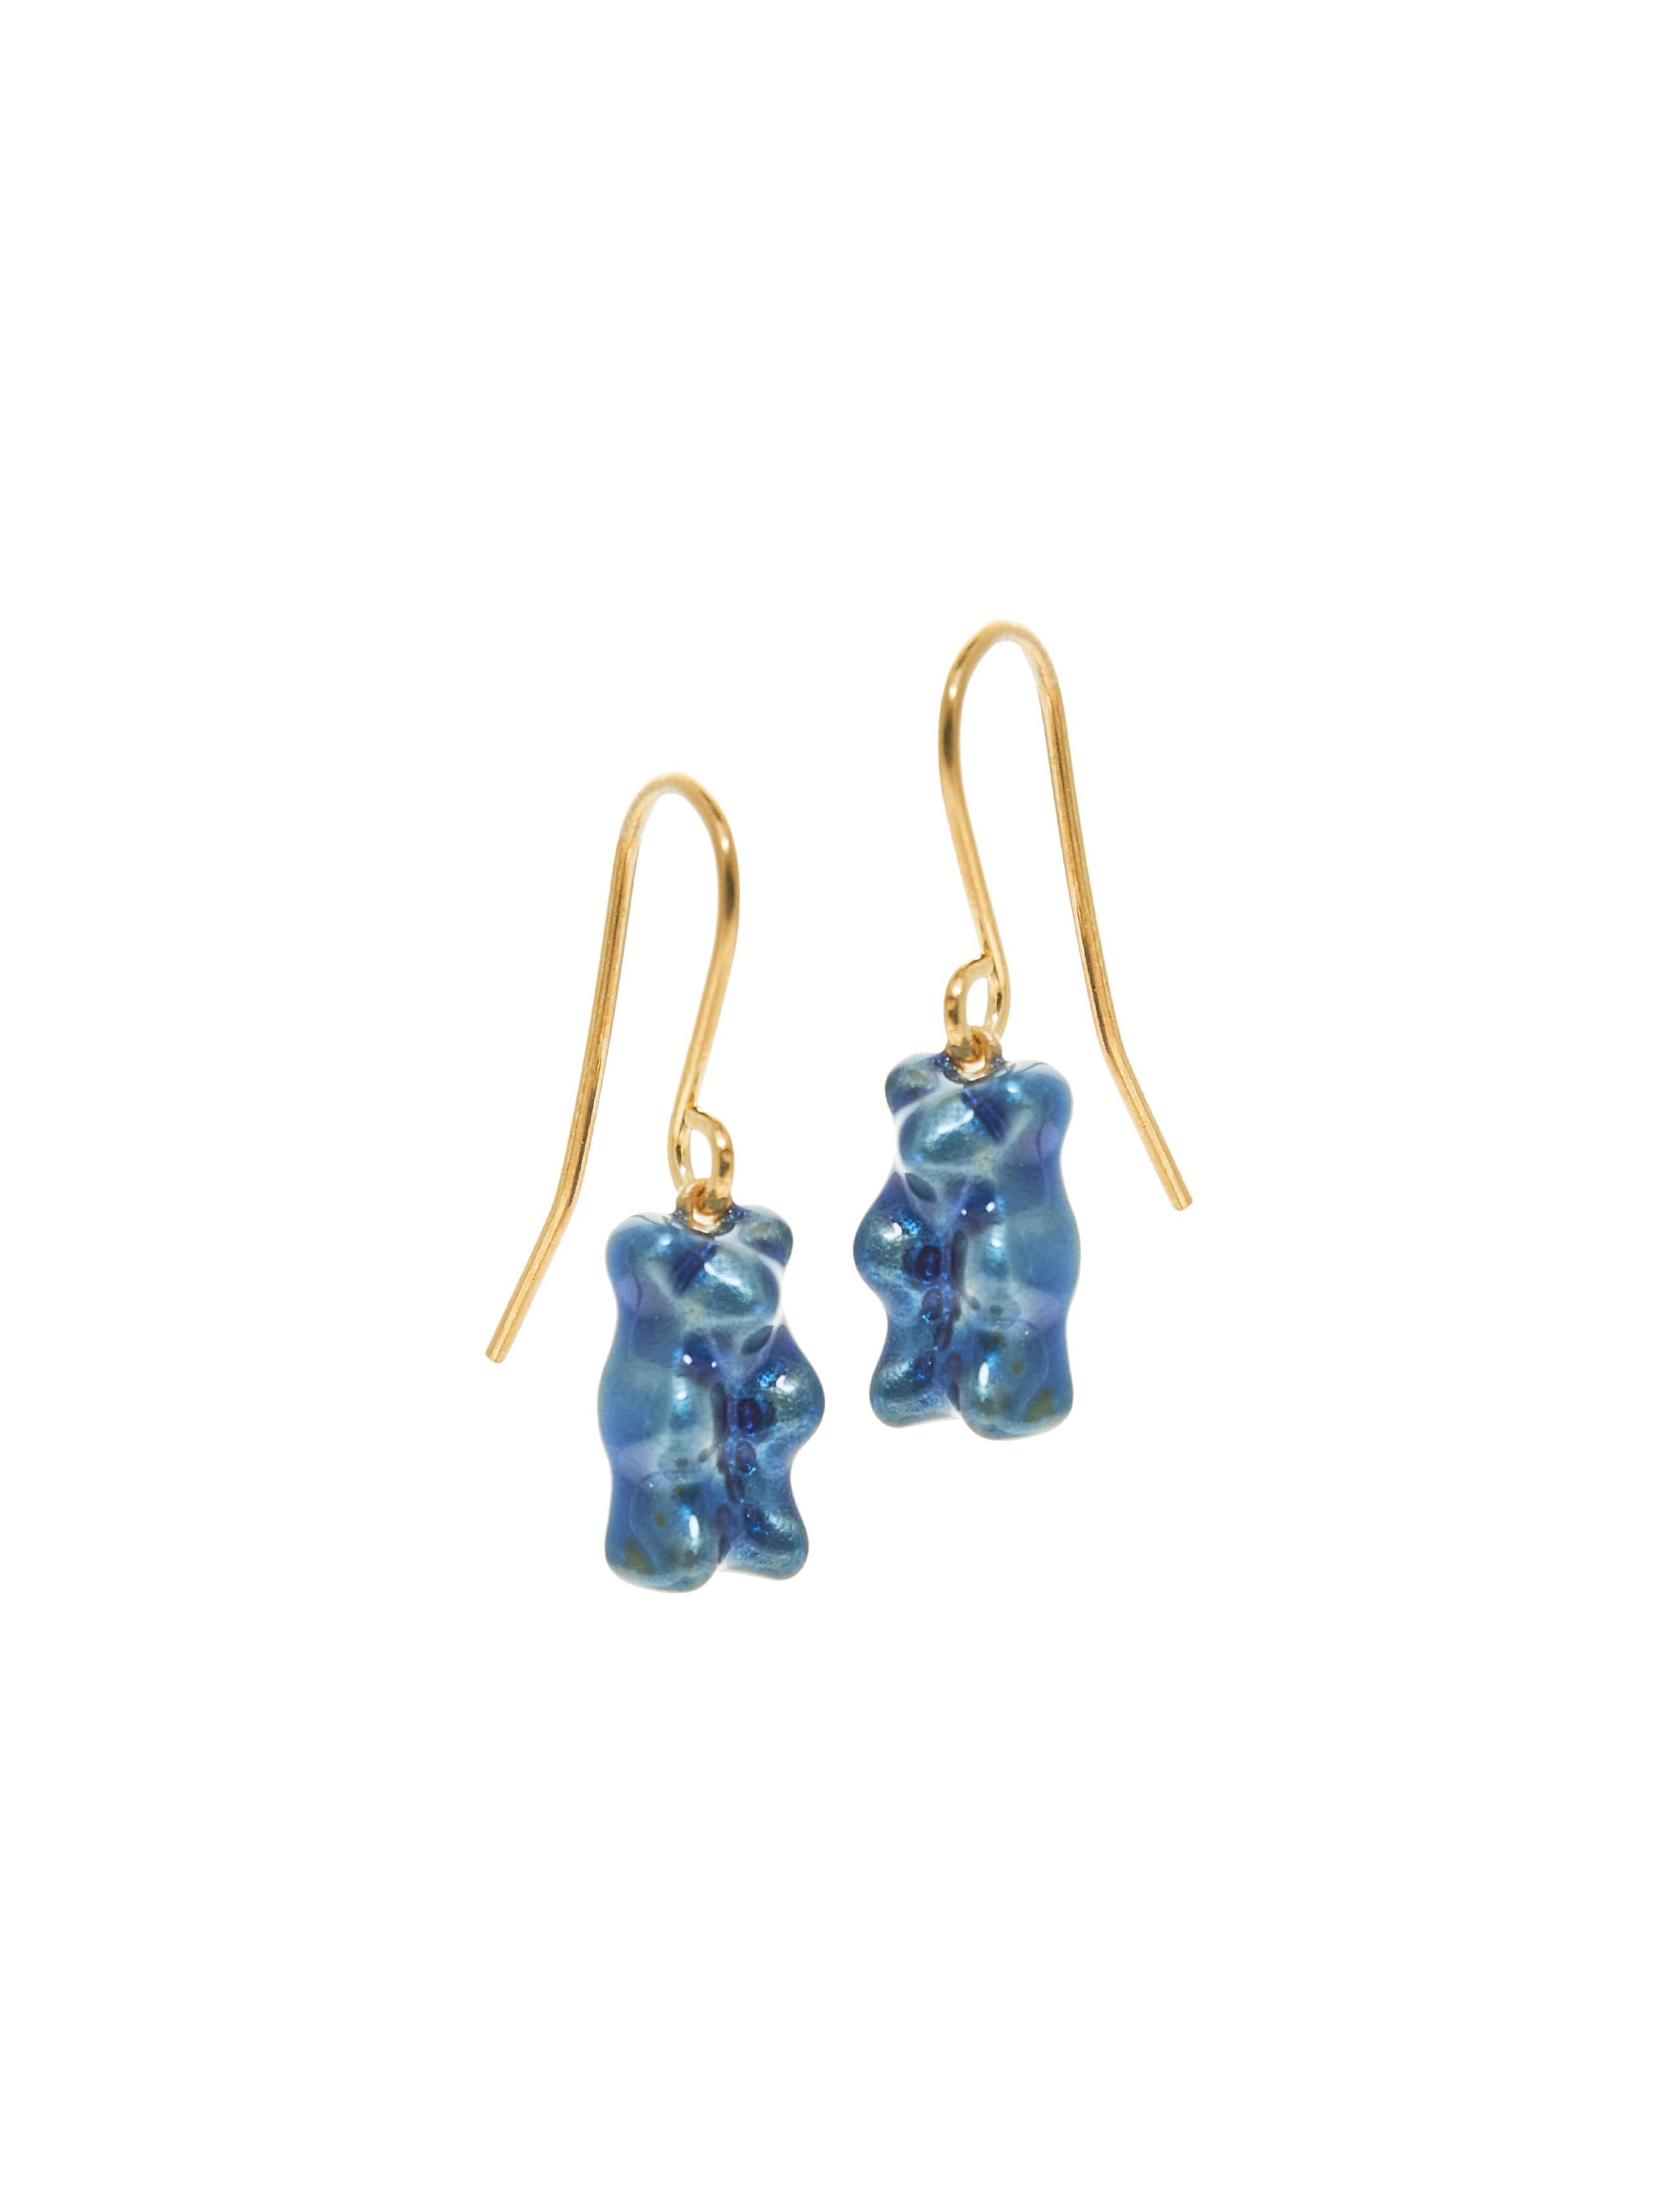 18K gold plated silver gummy bear drop earrings with transparent blue enamel coverage. 

The Gummy Project by Maggoosh is a capsule collection inspired by the designer's life in New York City and her passion for breakdancing and other street arts.